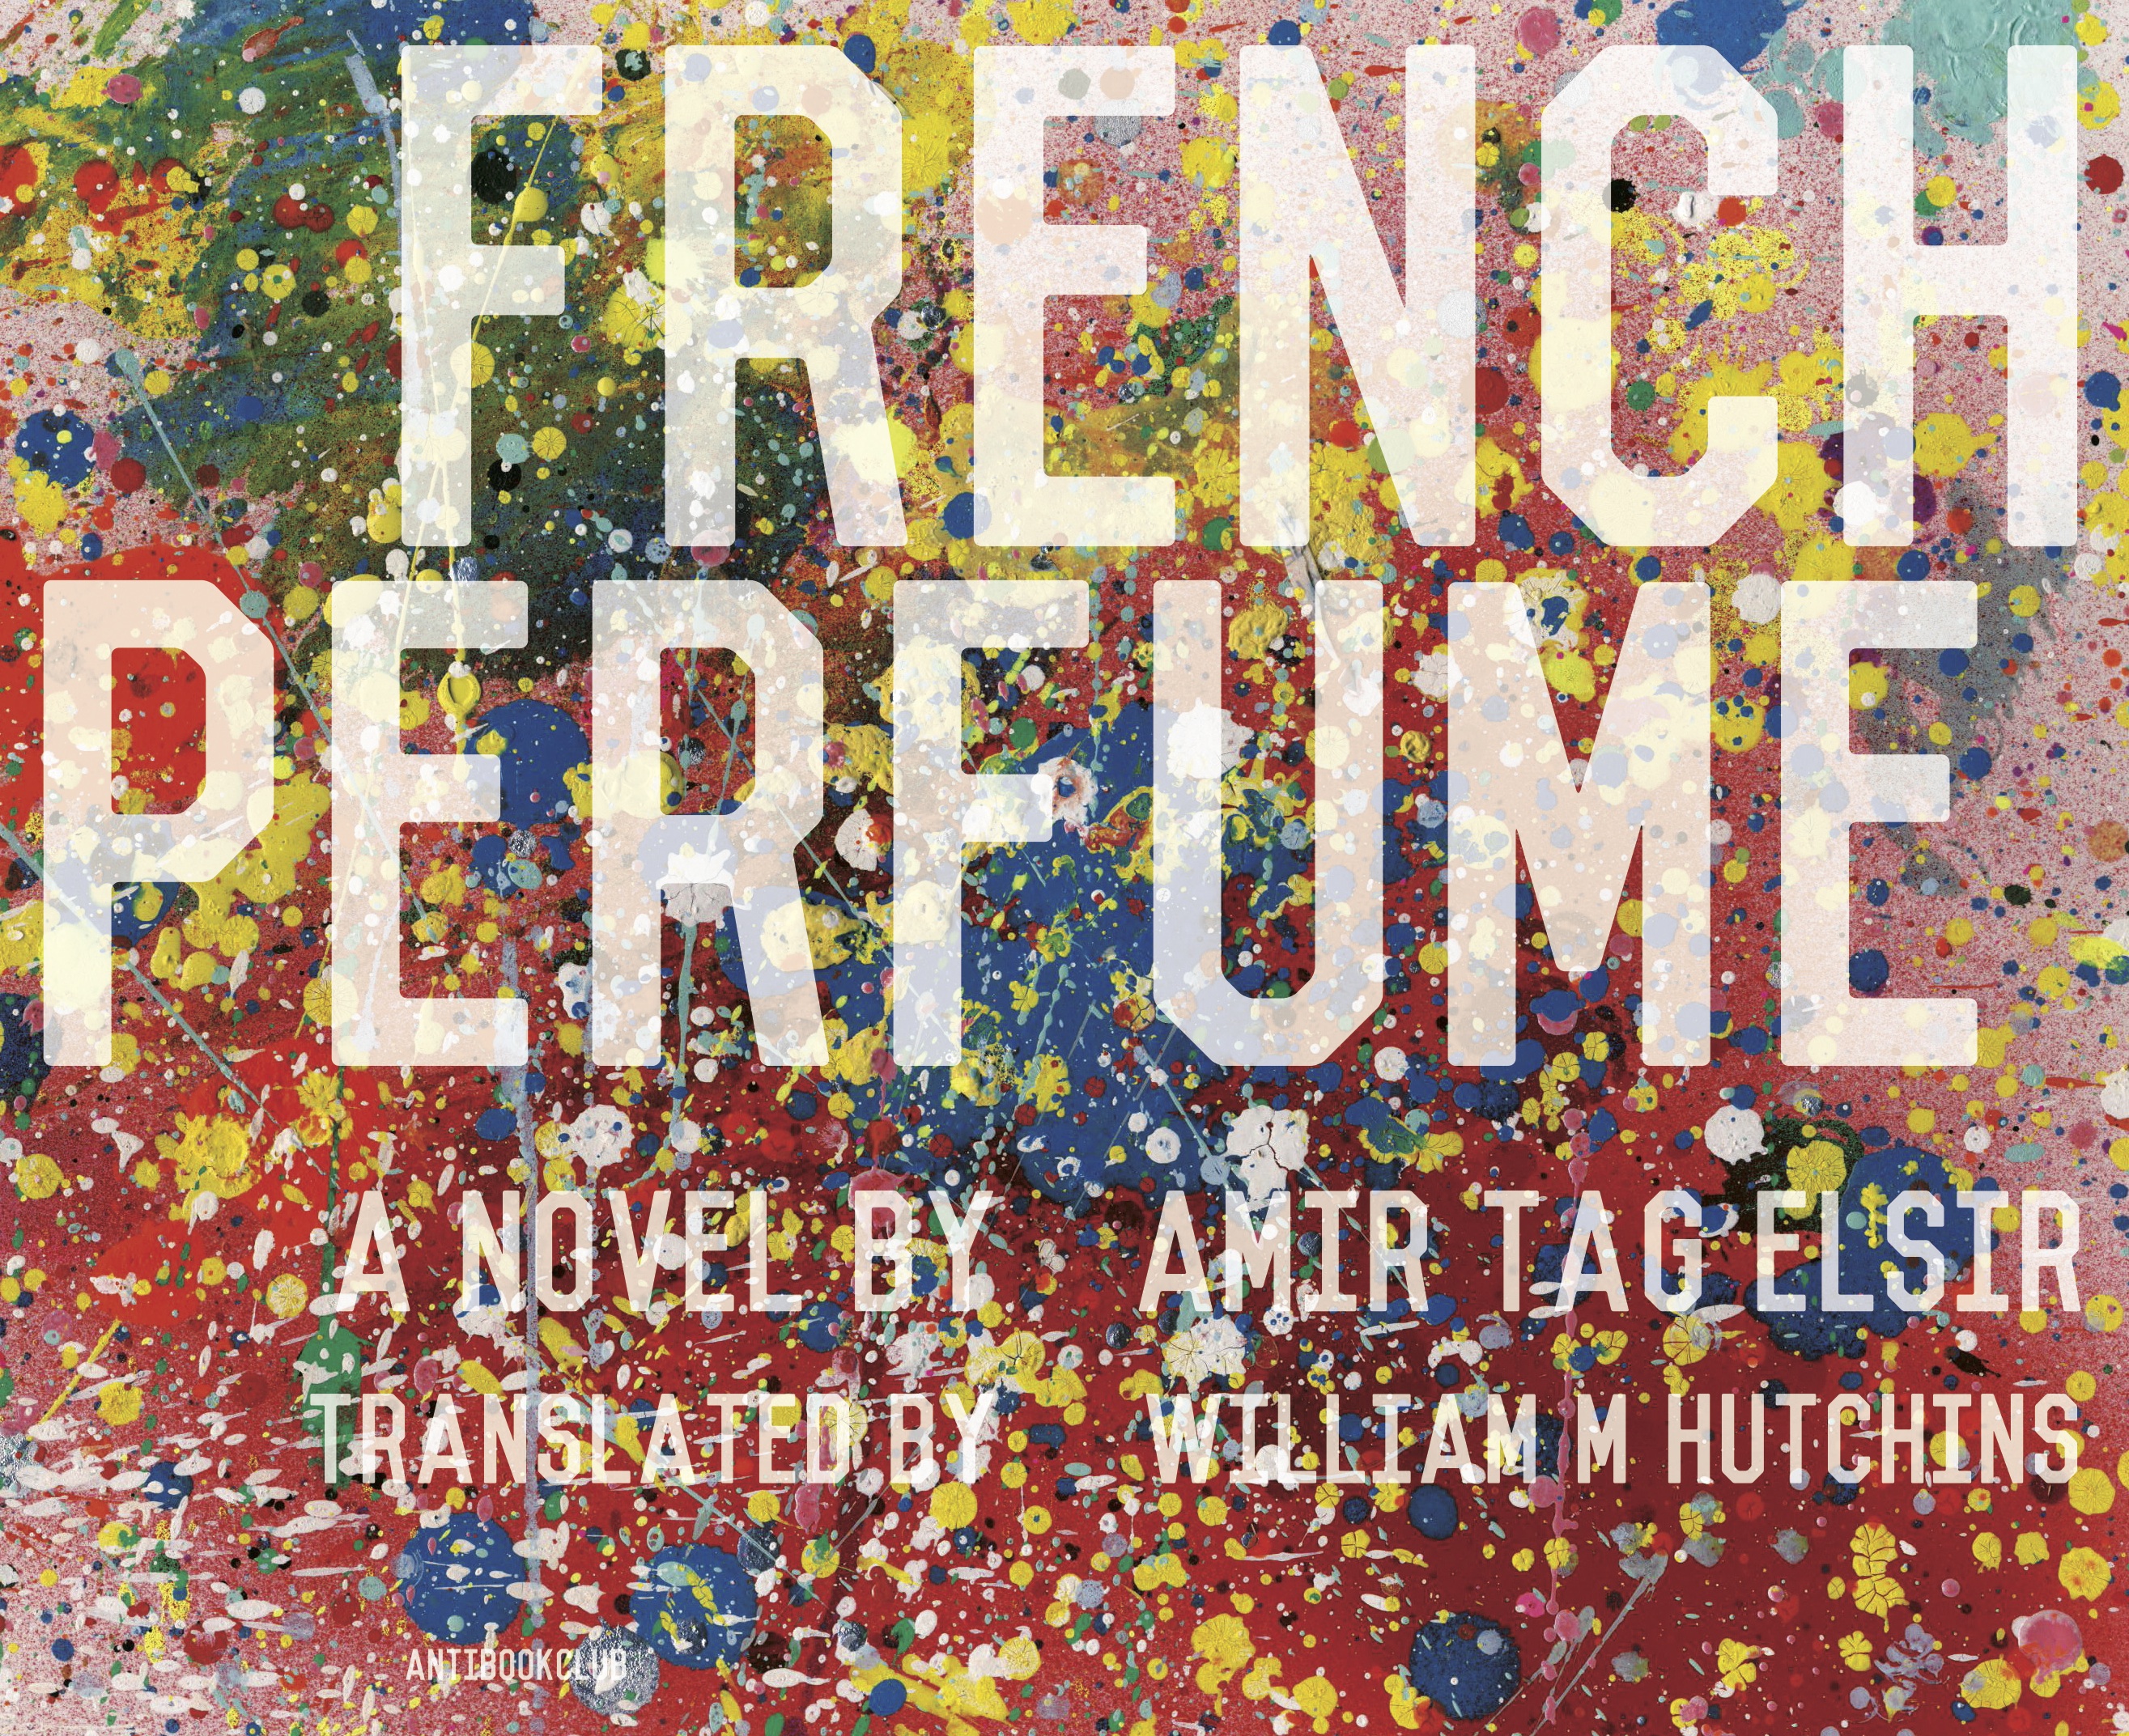 French Perfume_book cover